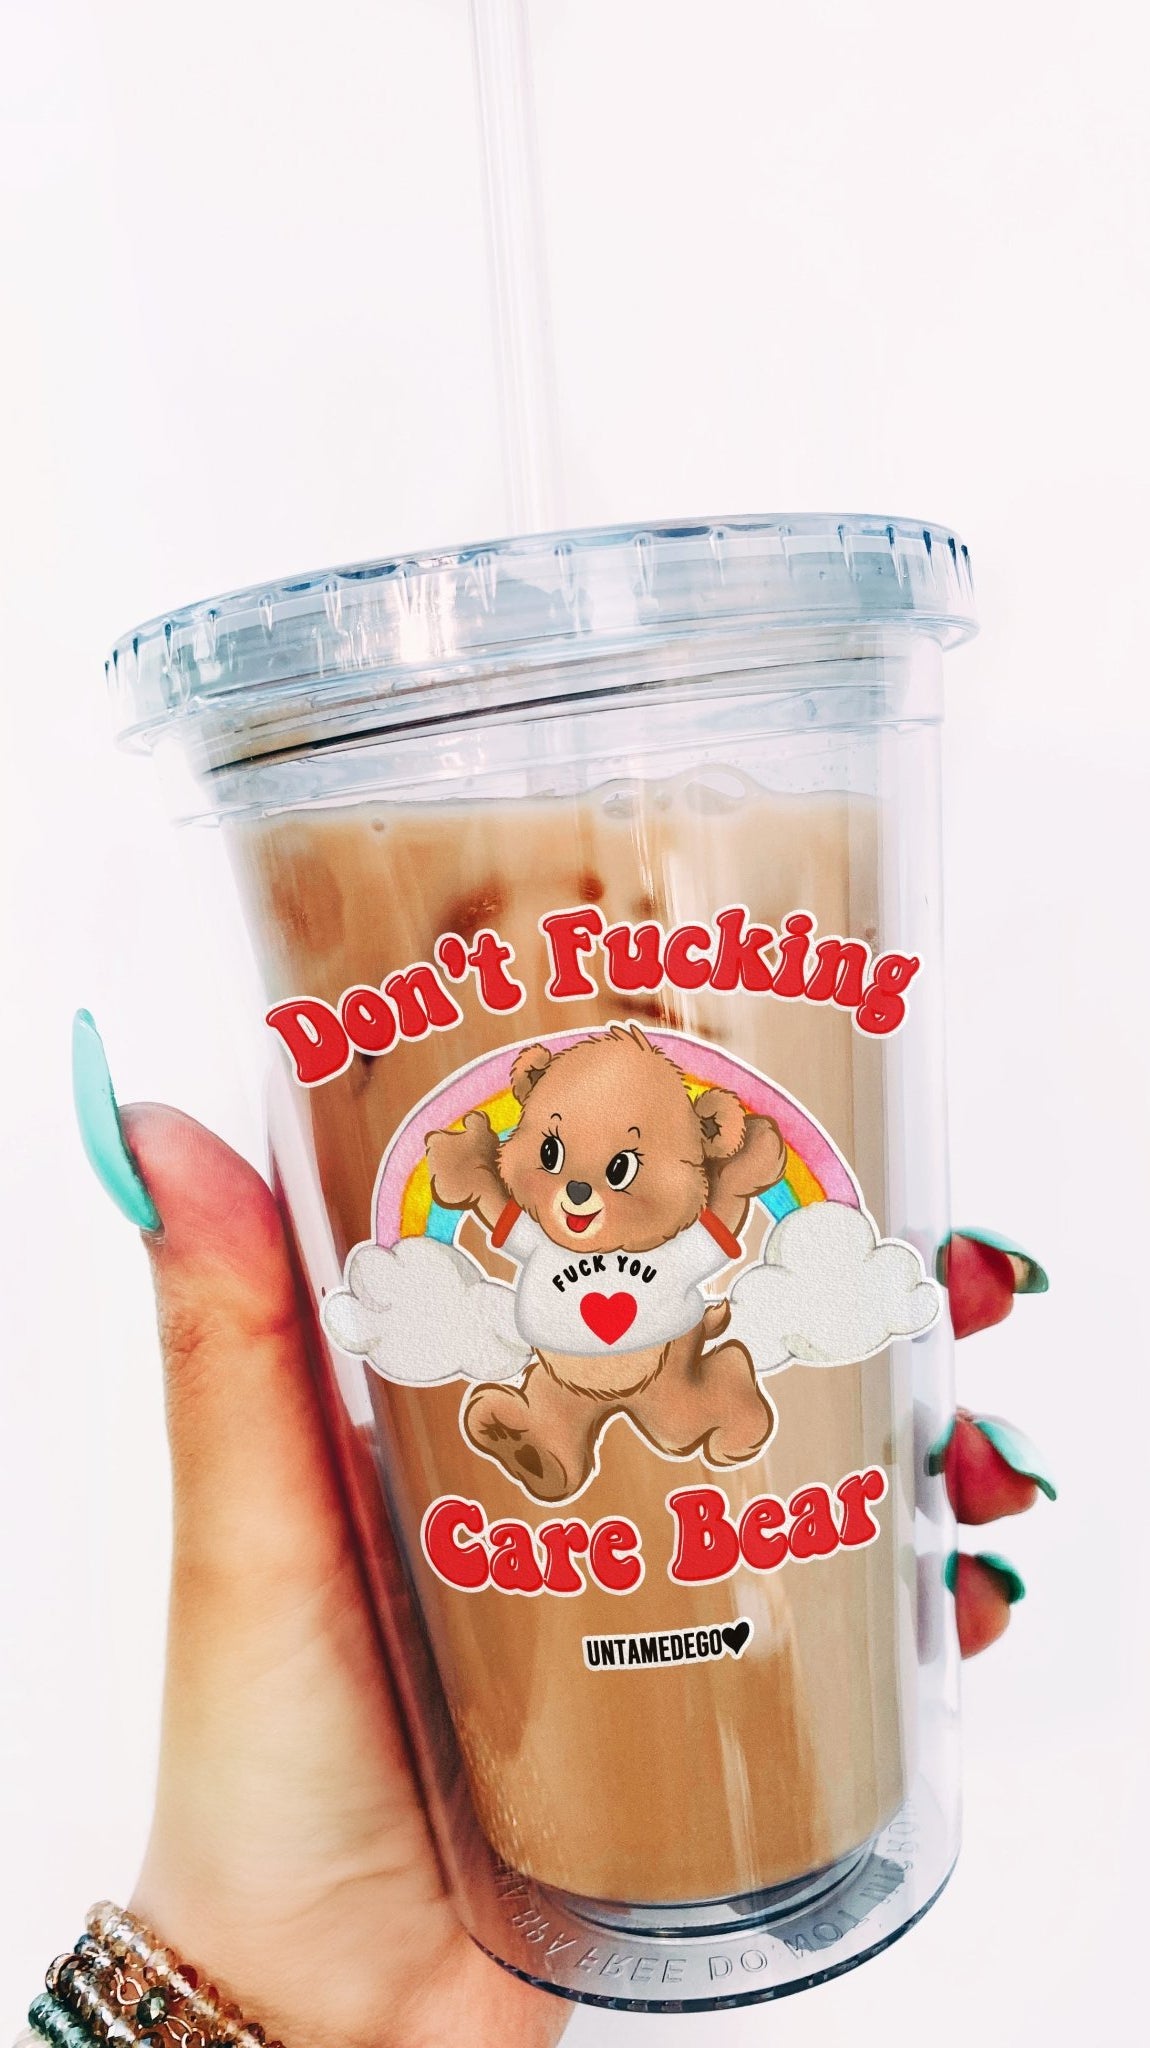 All My F*cks Are in This Cup Clear Glass Mug –